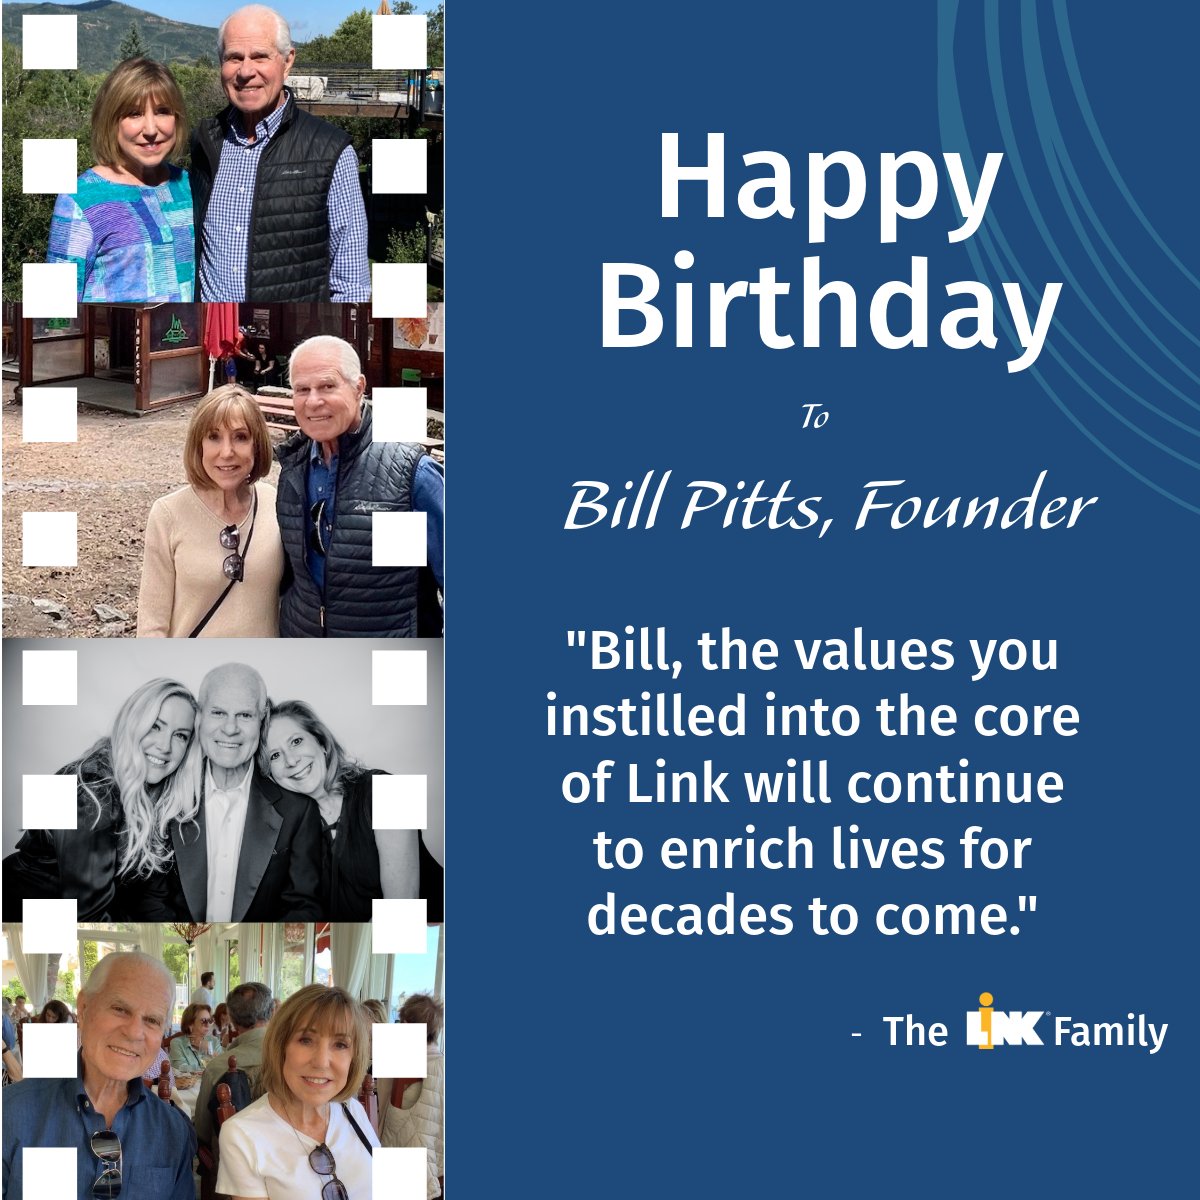 Please join us in wishing Link's founder, Bill Pitts, a very happy birthday! #LinkValues #LinkJobs #LinkFamily #BirthdayWishes #HappyBirthday #Founder #Executive #Professional